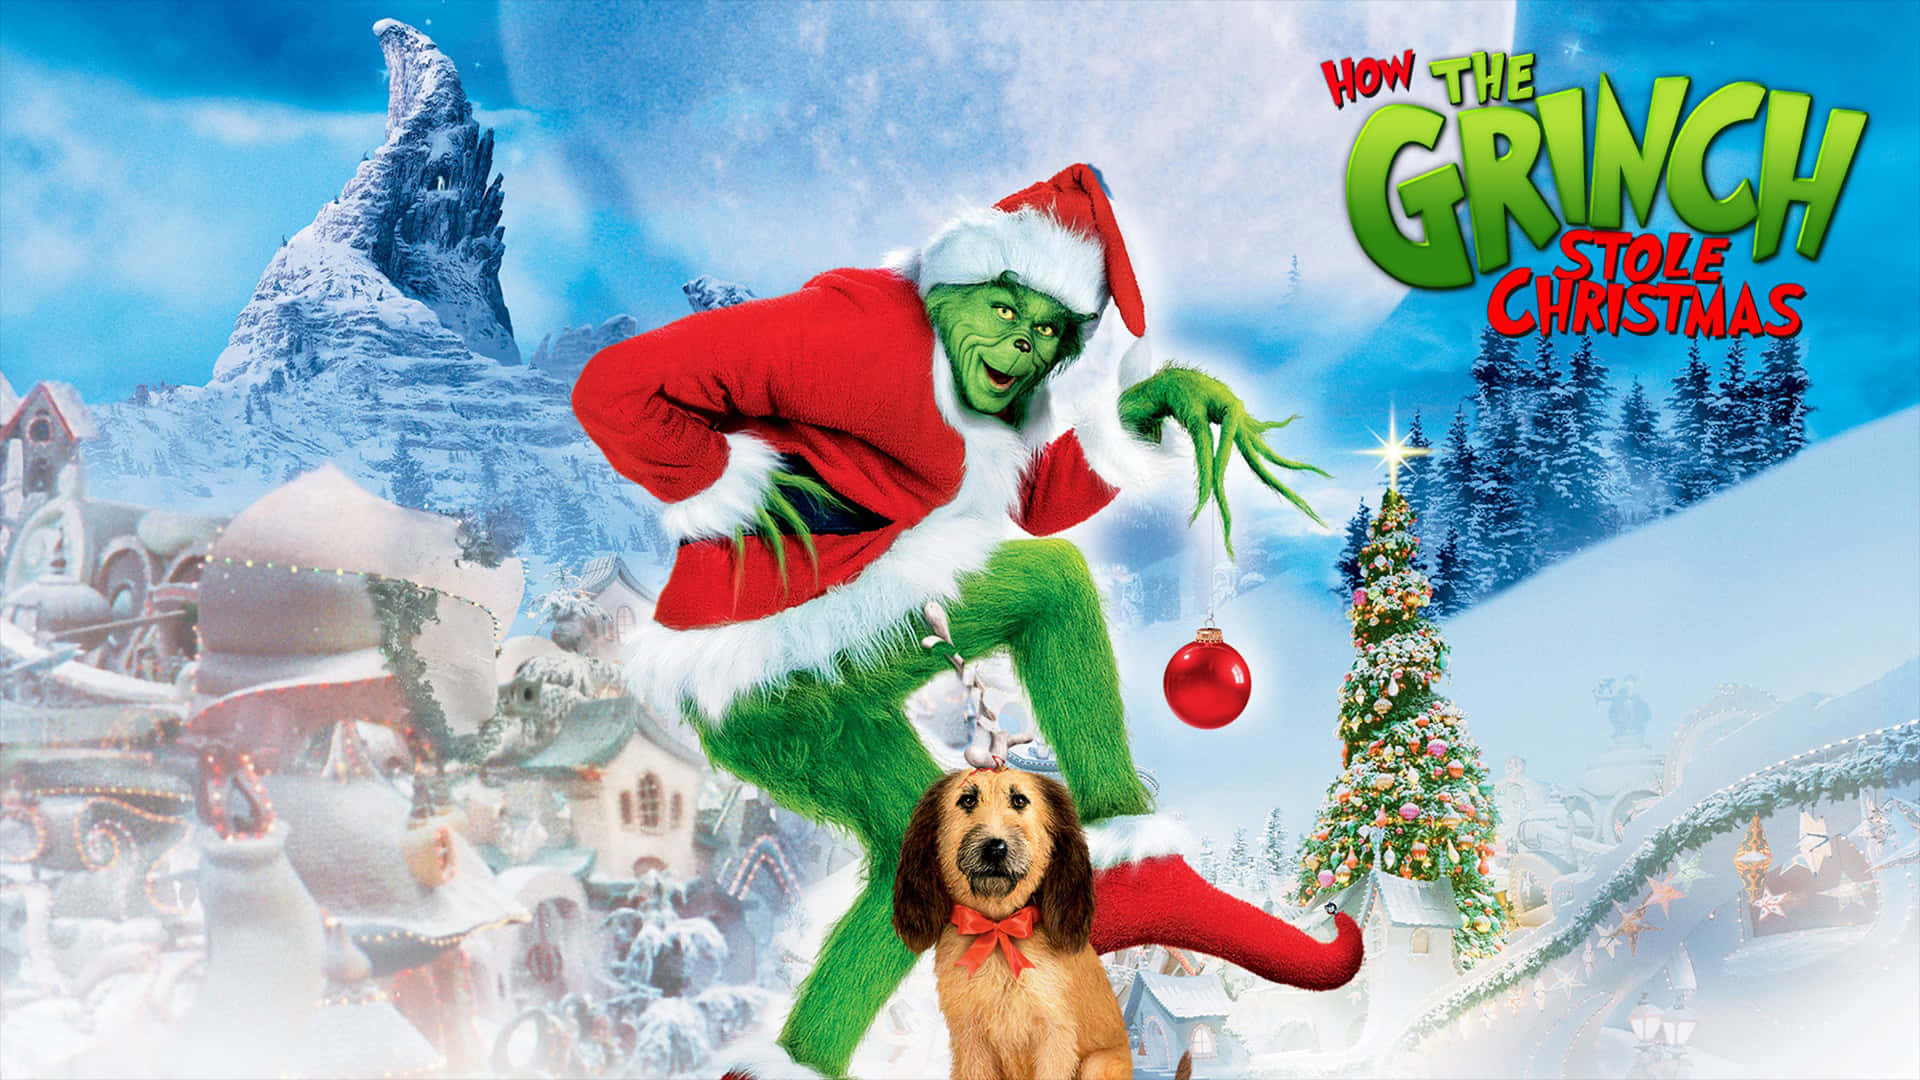 The Grinch And The Christmas Tree Wallpaper